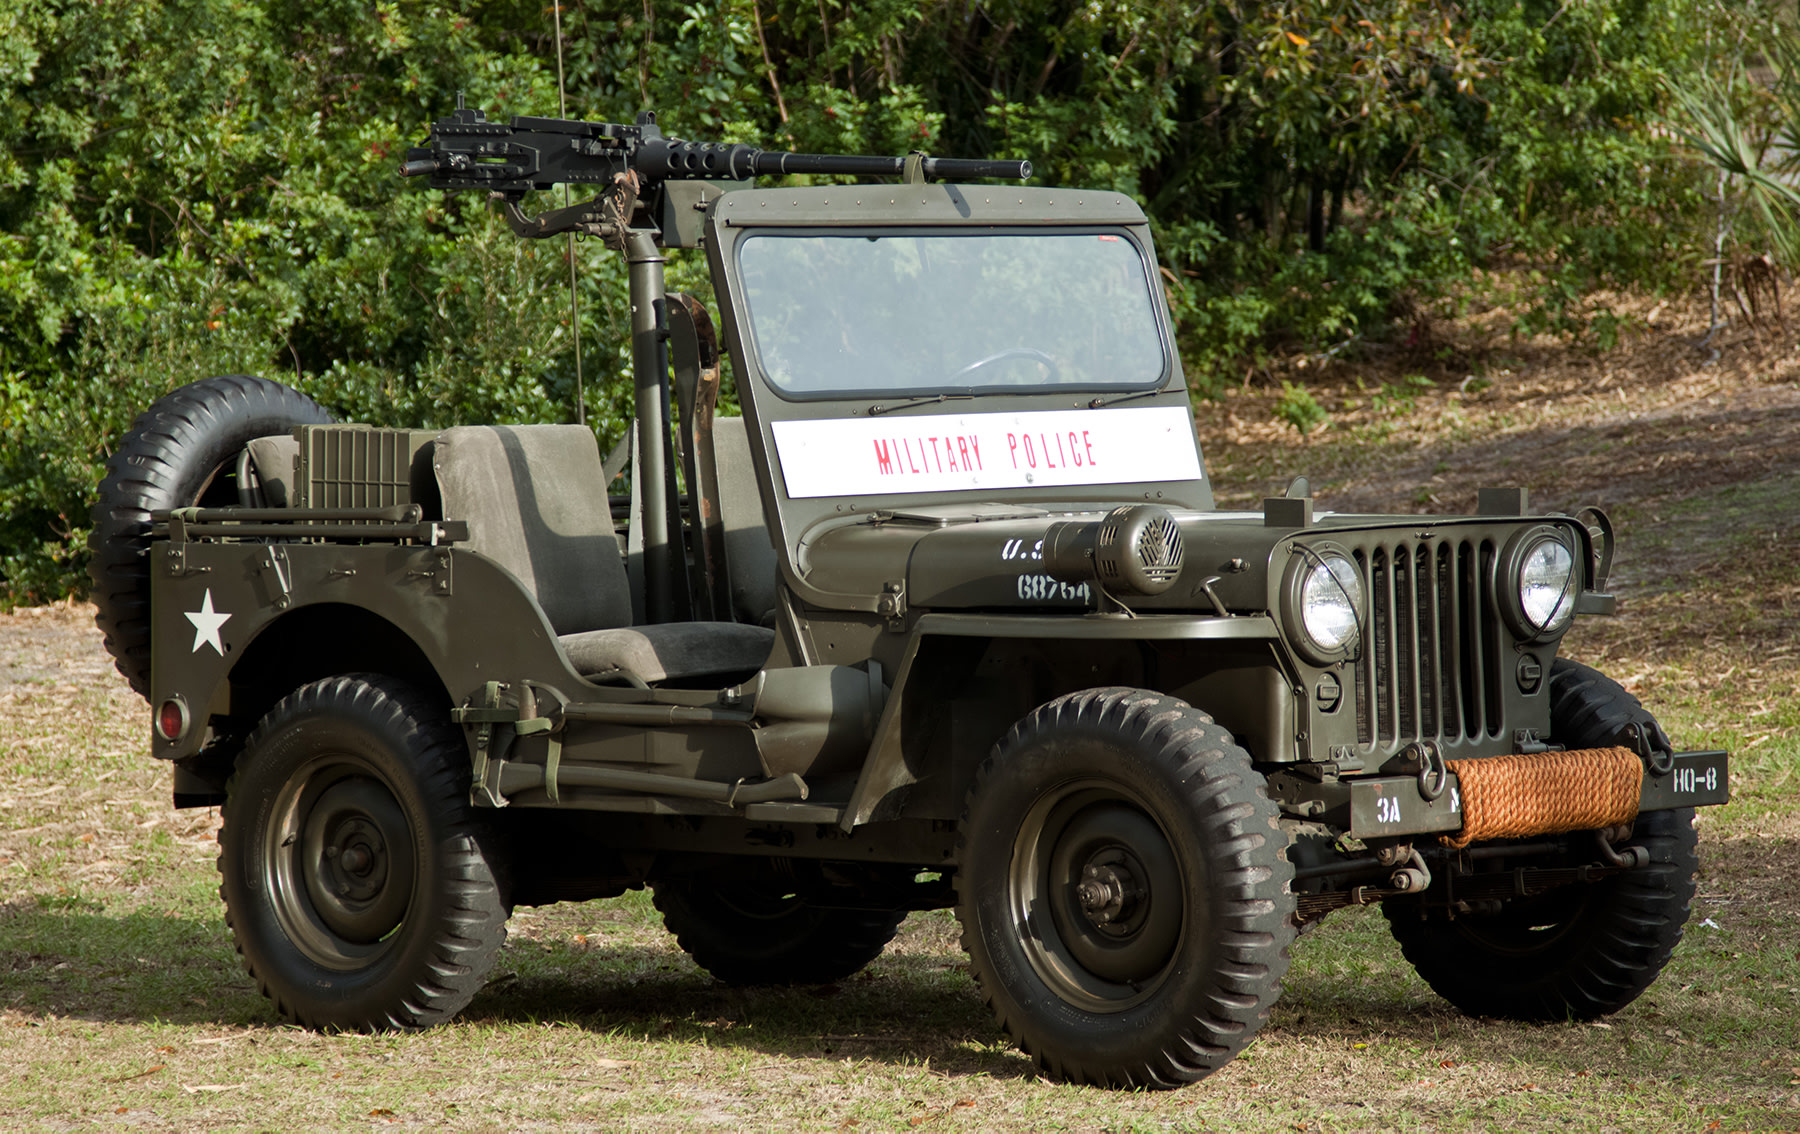 1951 Willys M38 Jeep